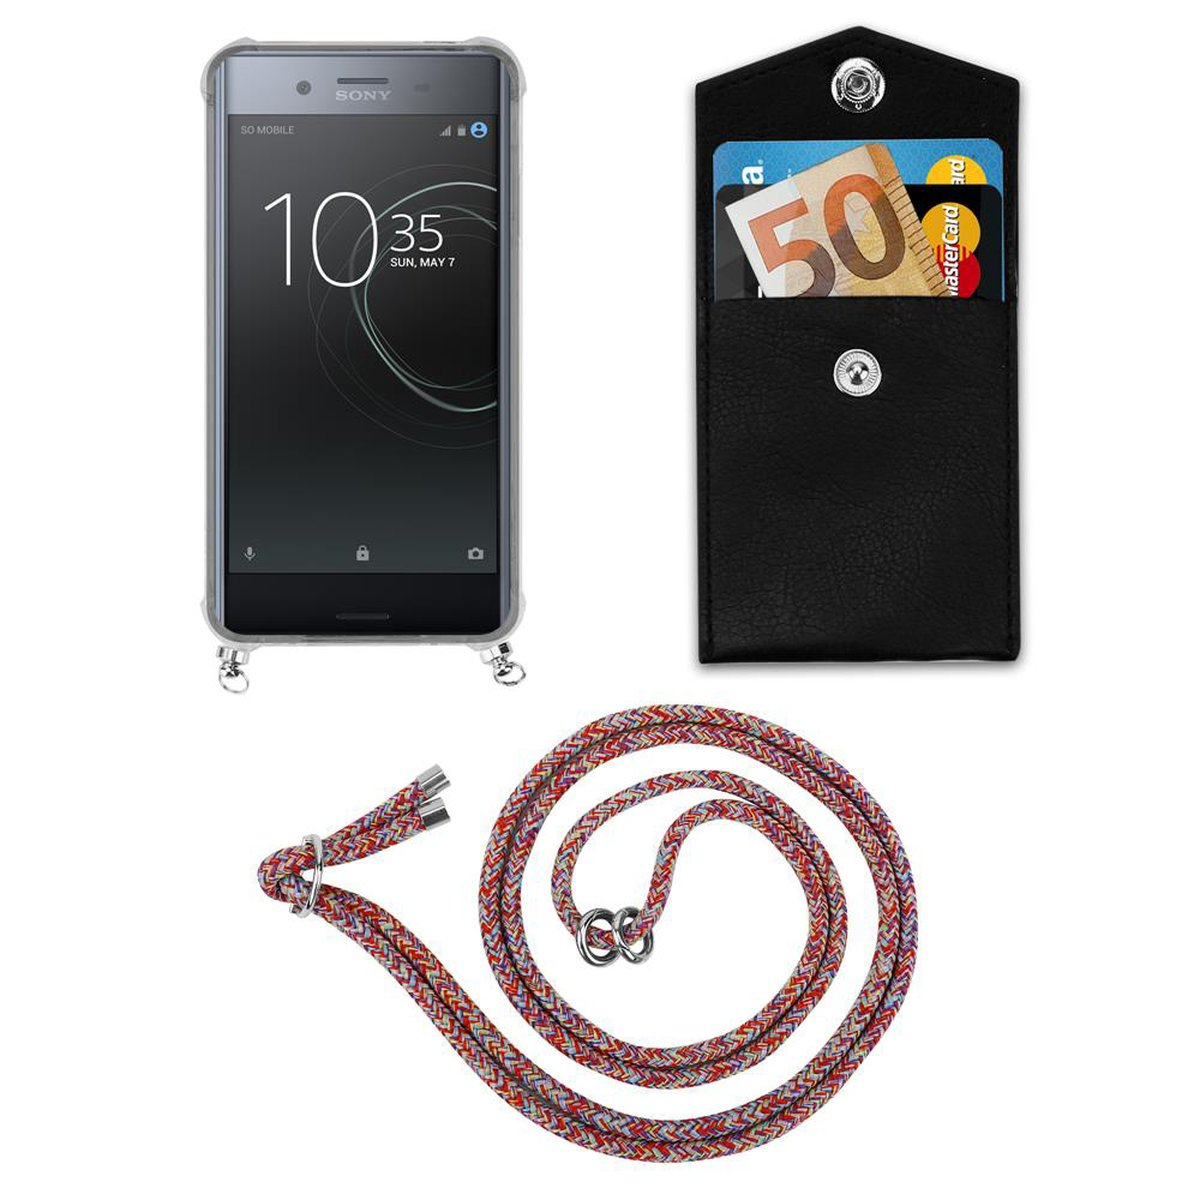 CADORABO Handy Kette mit Backcover, Xperia Silber Sony, XZ Hülle, Kordel Band abnehmbarer XZs, und PARROT / Ringen, COLORFUL